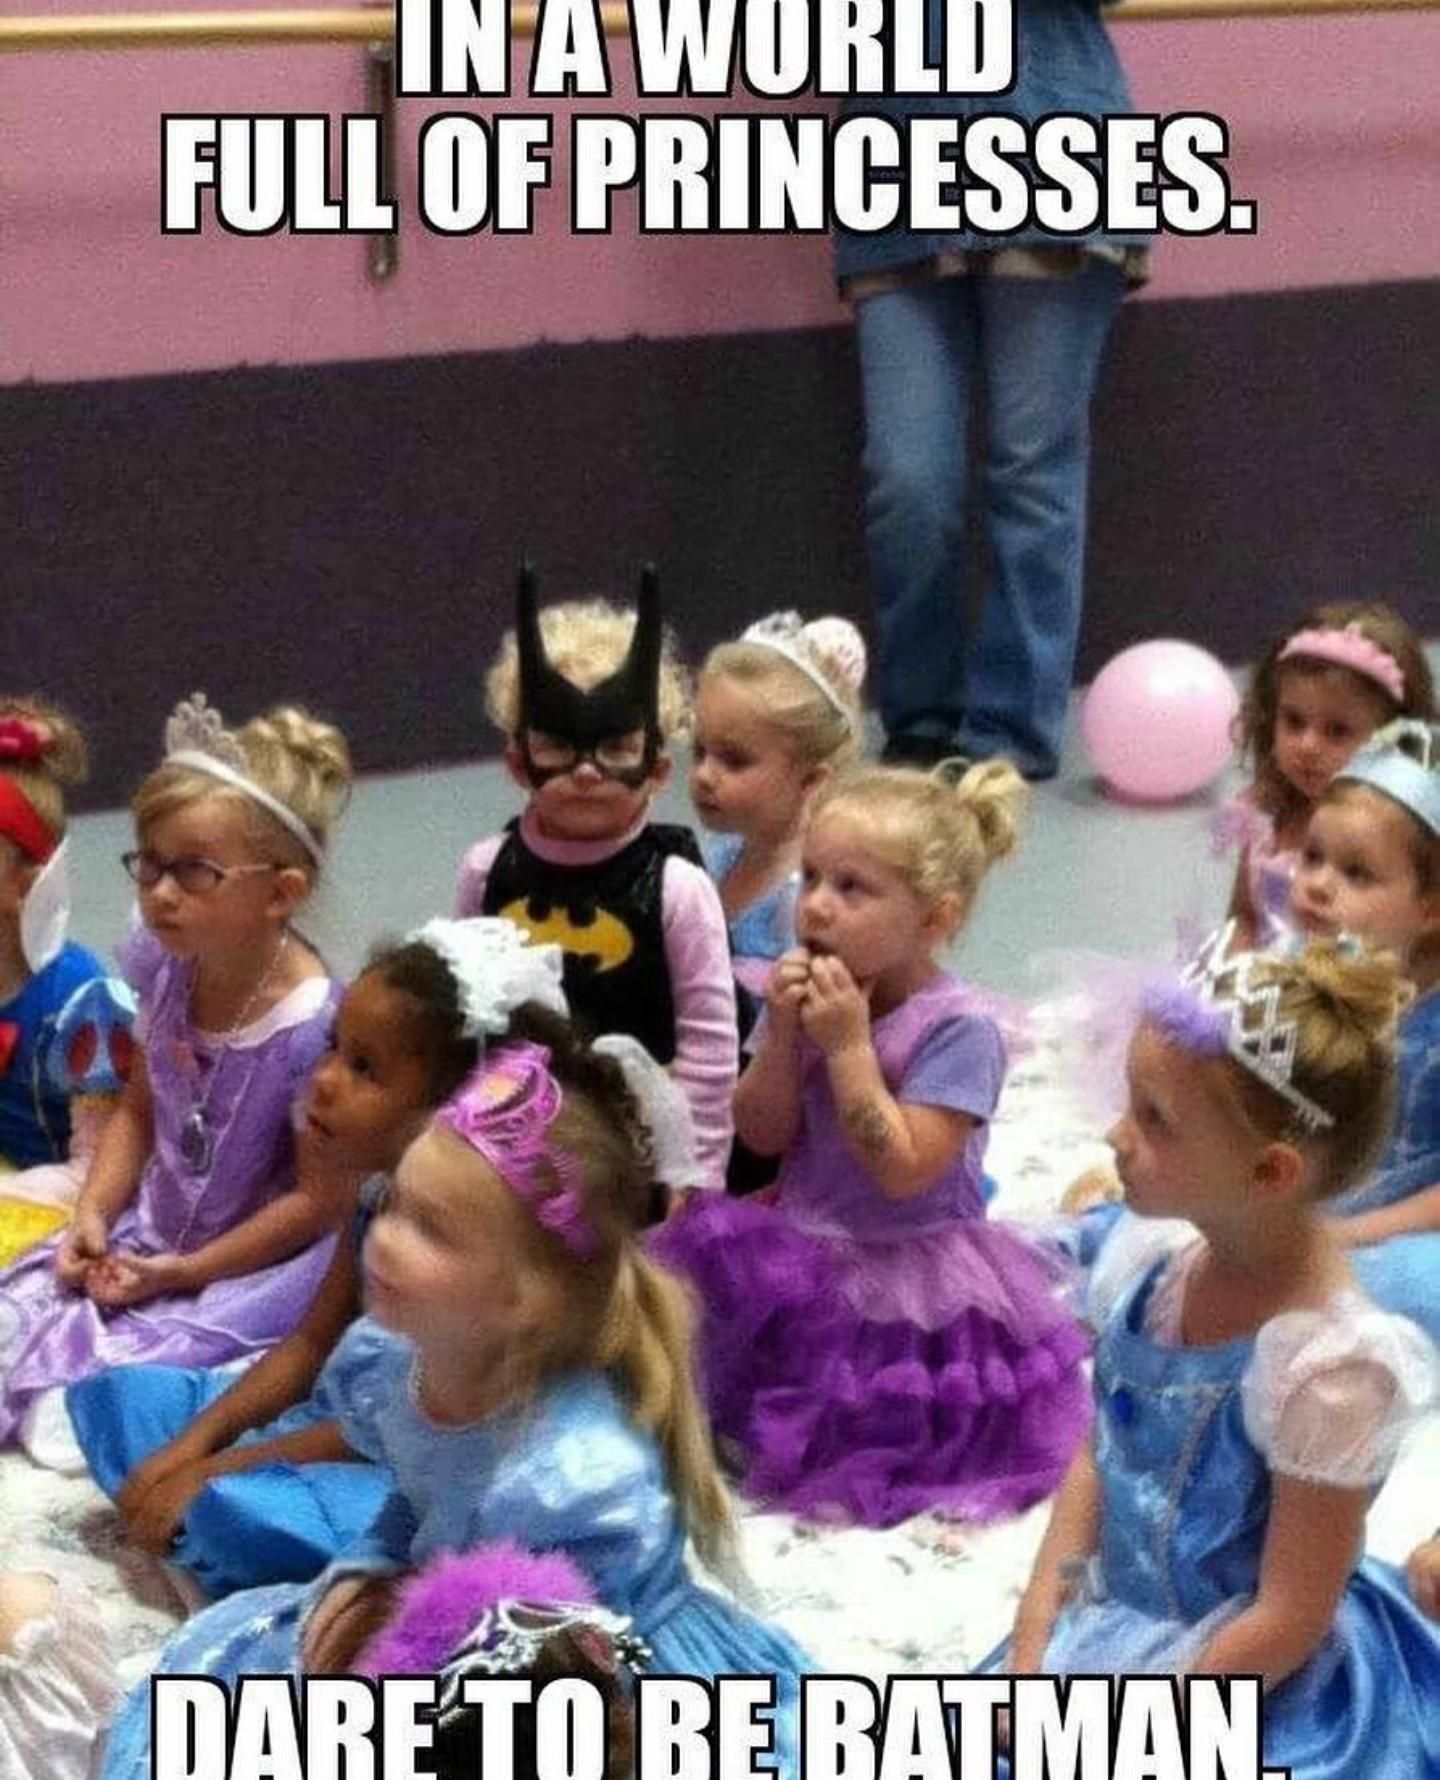 In a world full of princesses, dare to be batman!